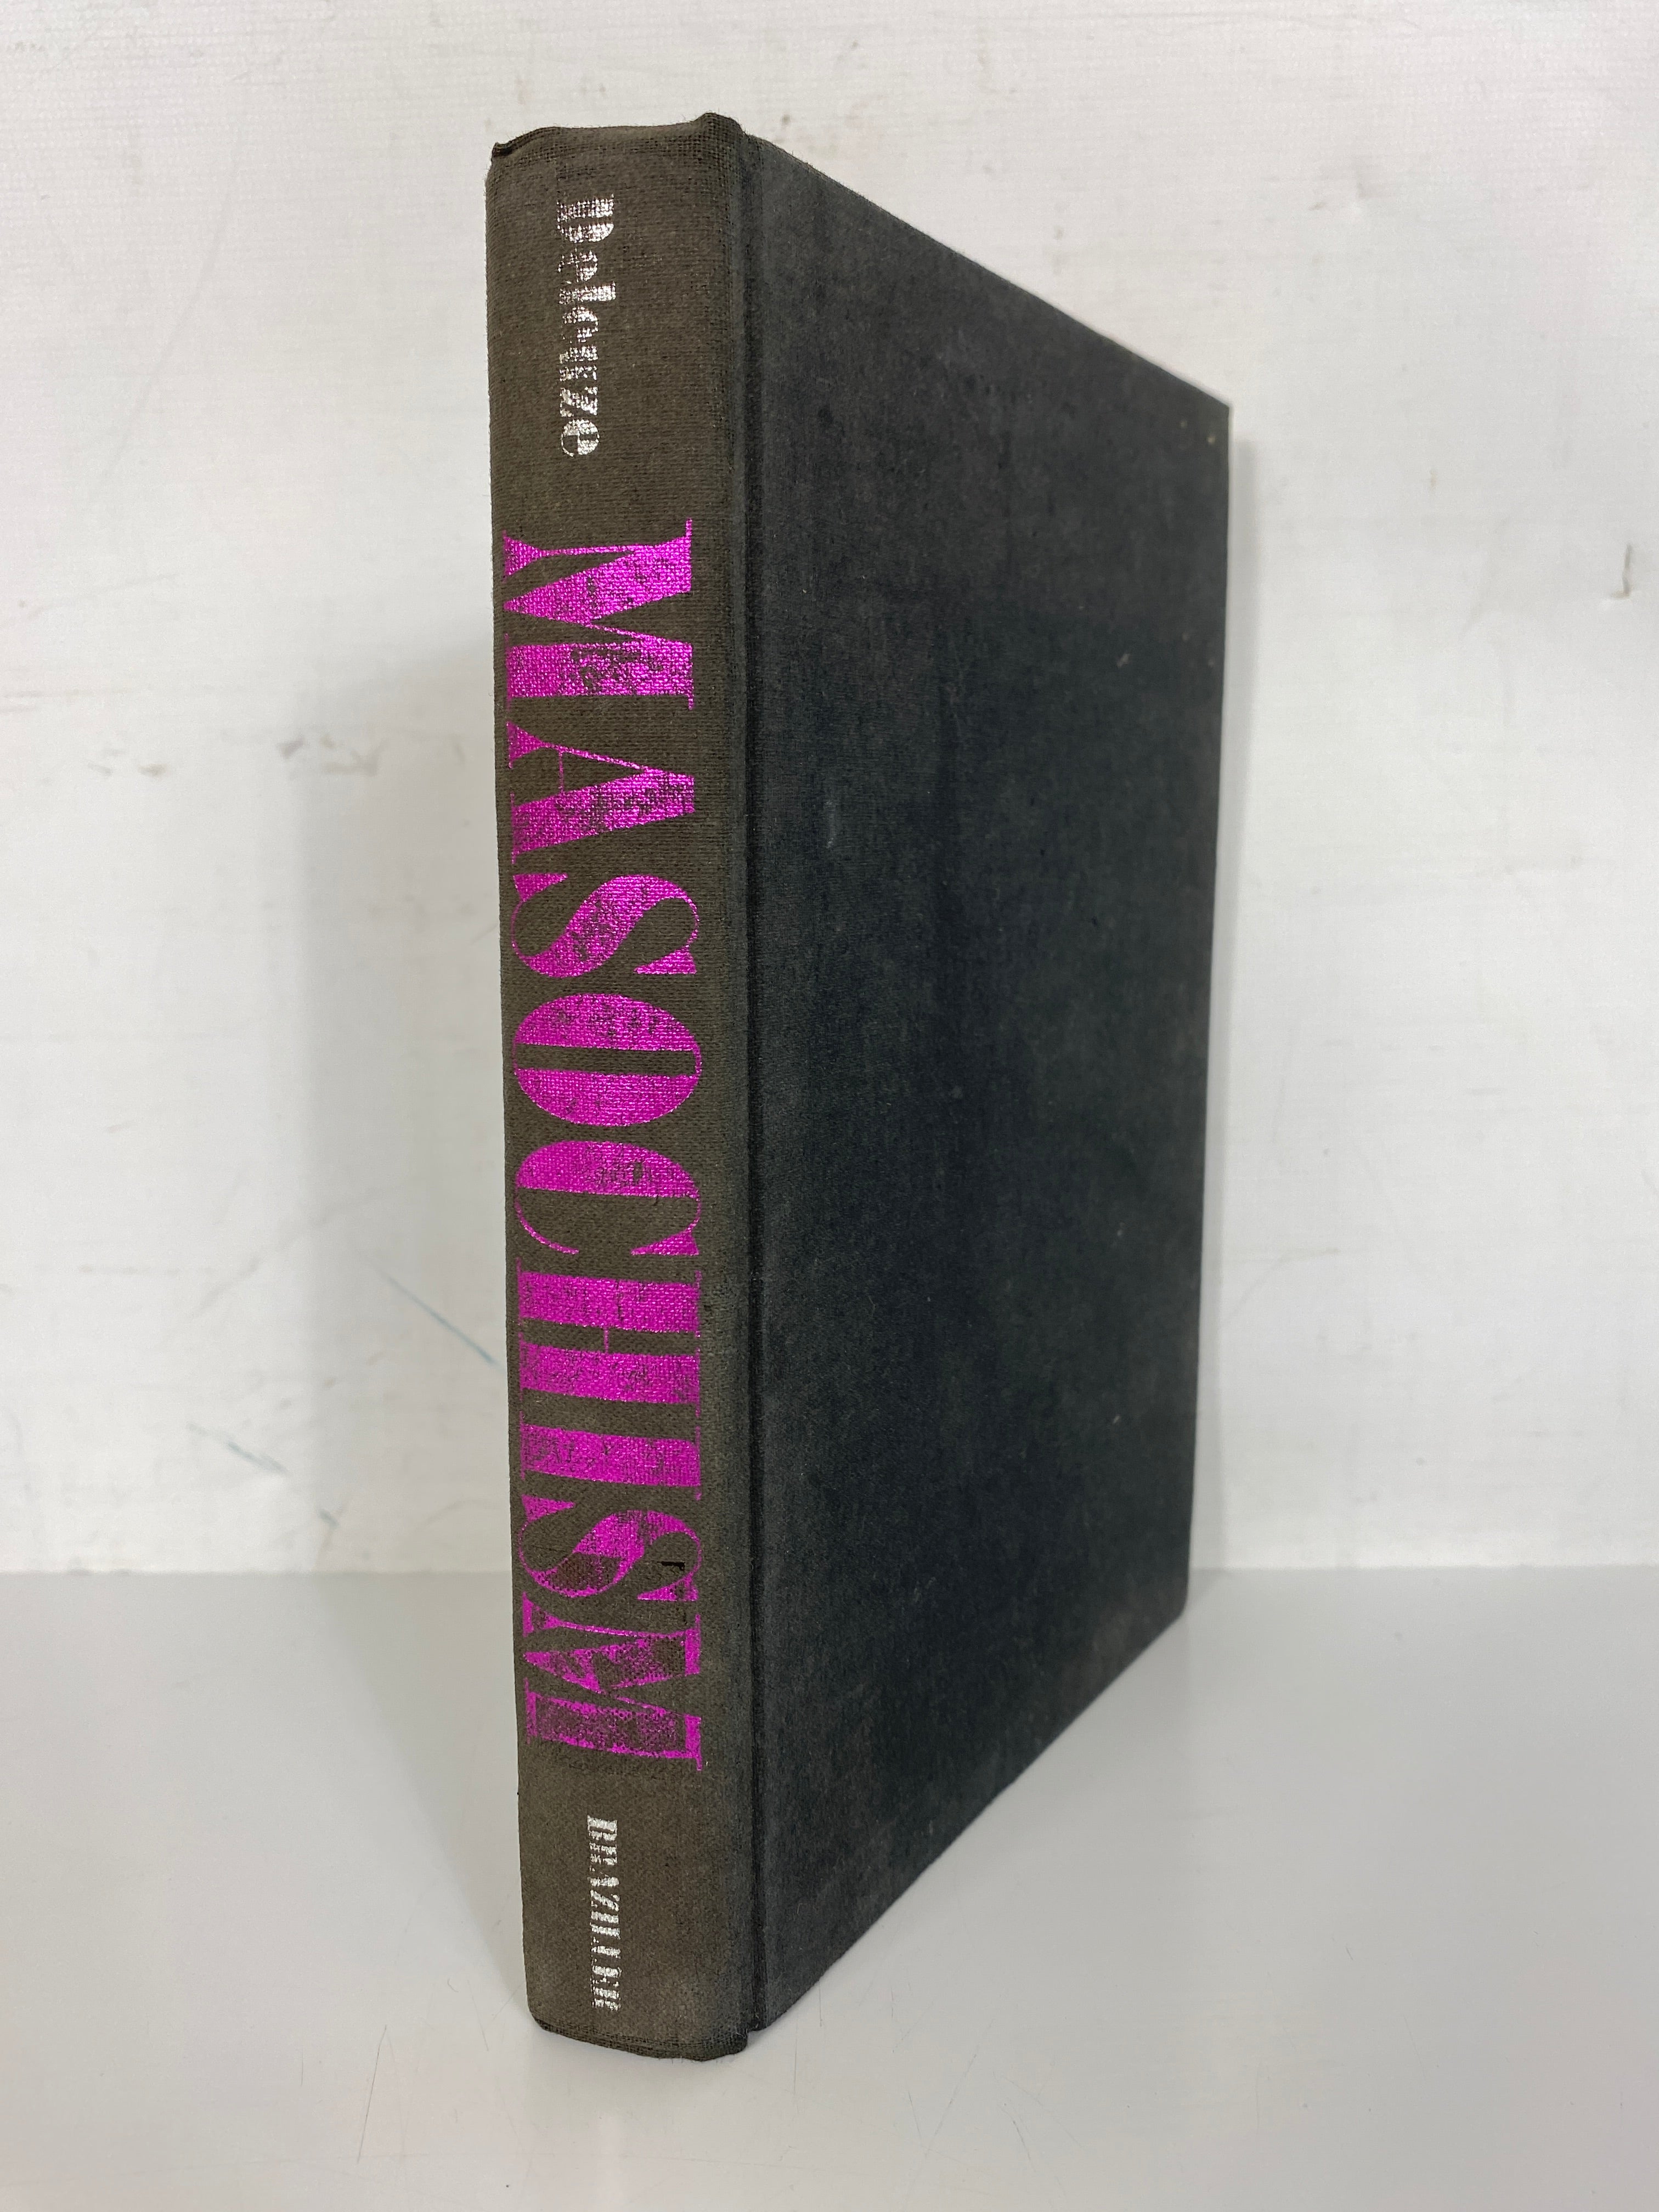 Masochism by Gilles Deleuze (1971) 1st U.S. Edition, 1st Printing An Interpretation of Coldness and Cruelty HC